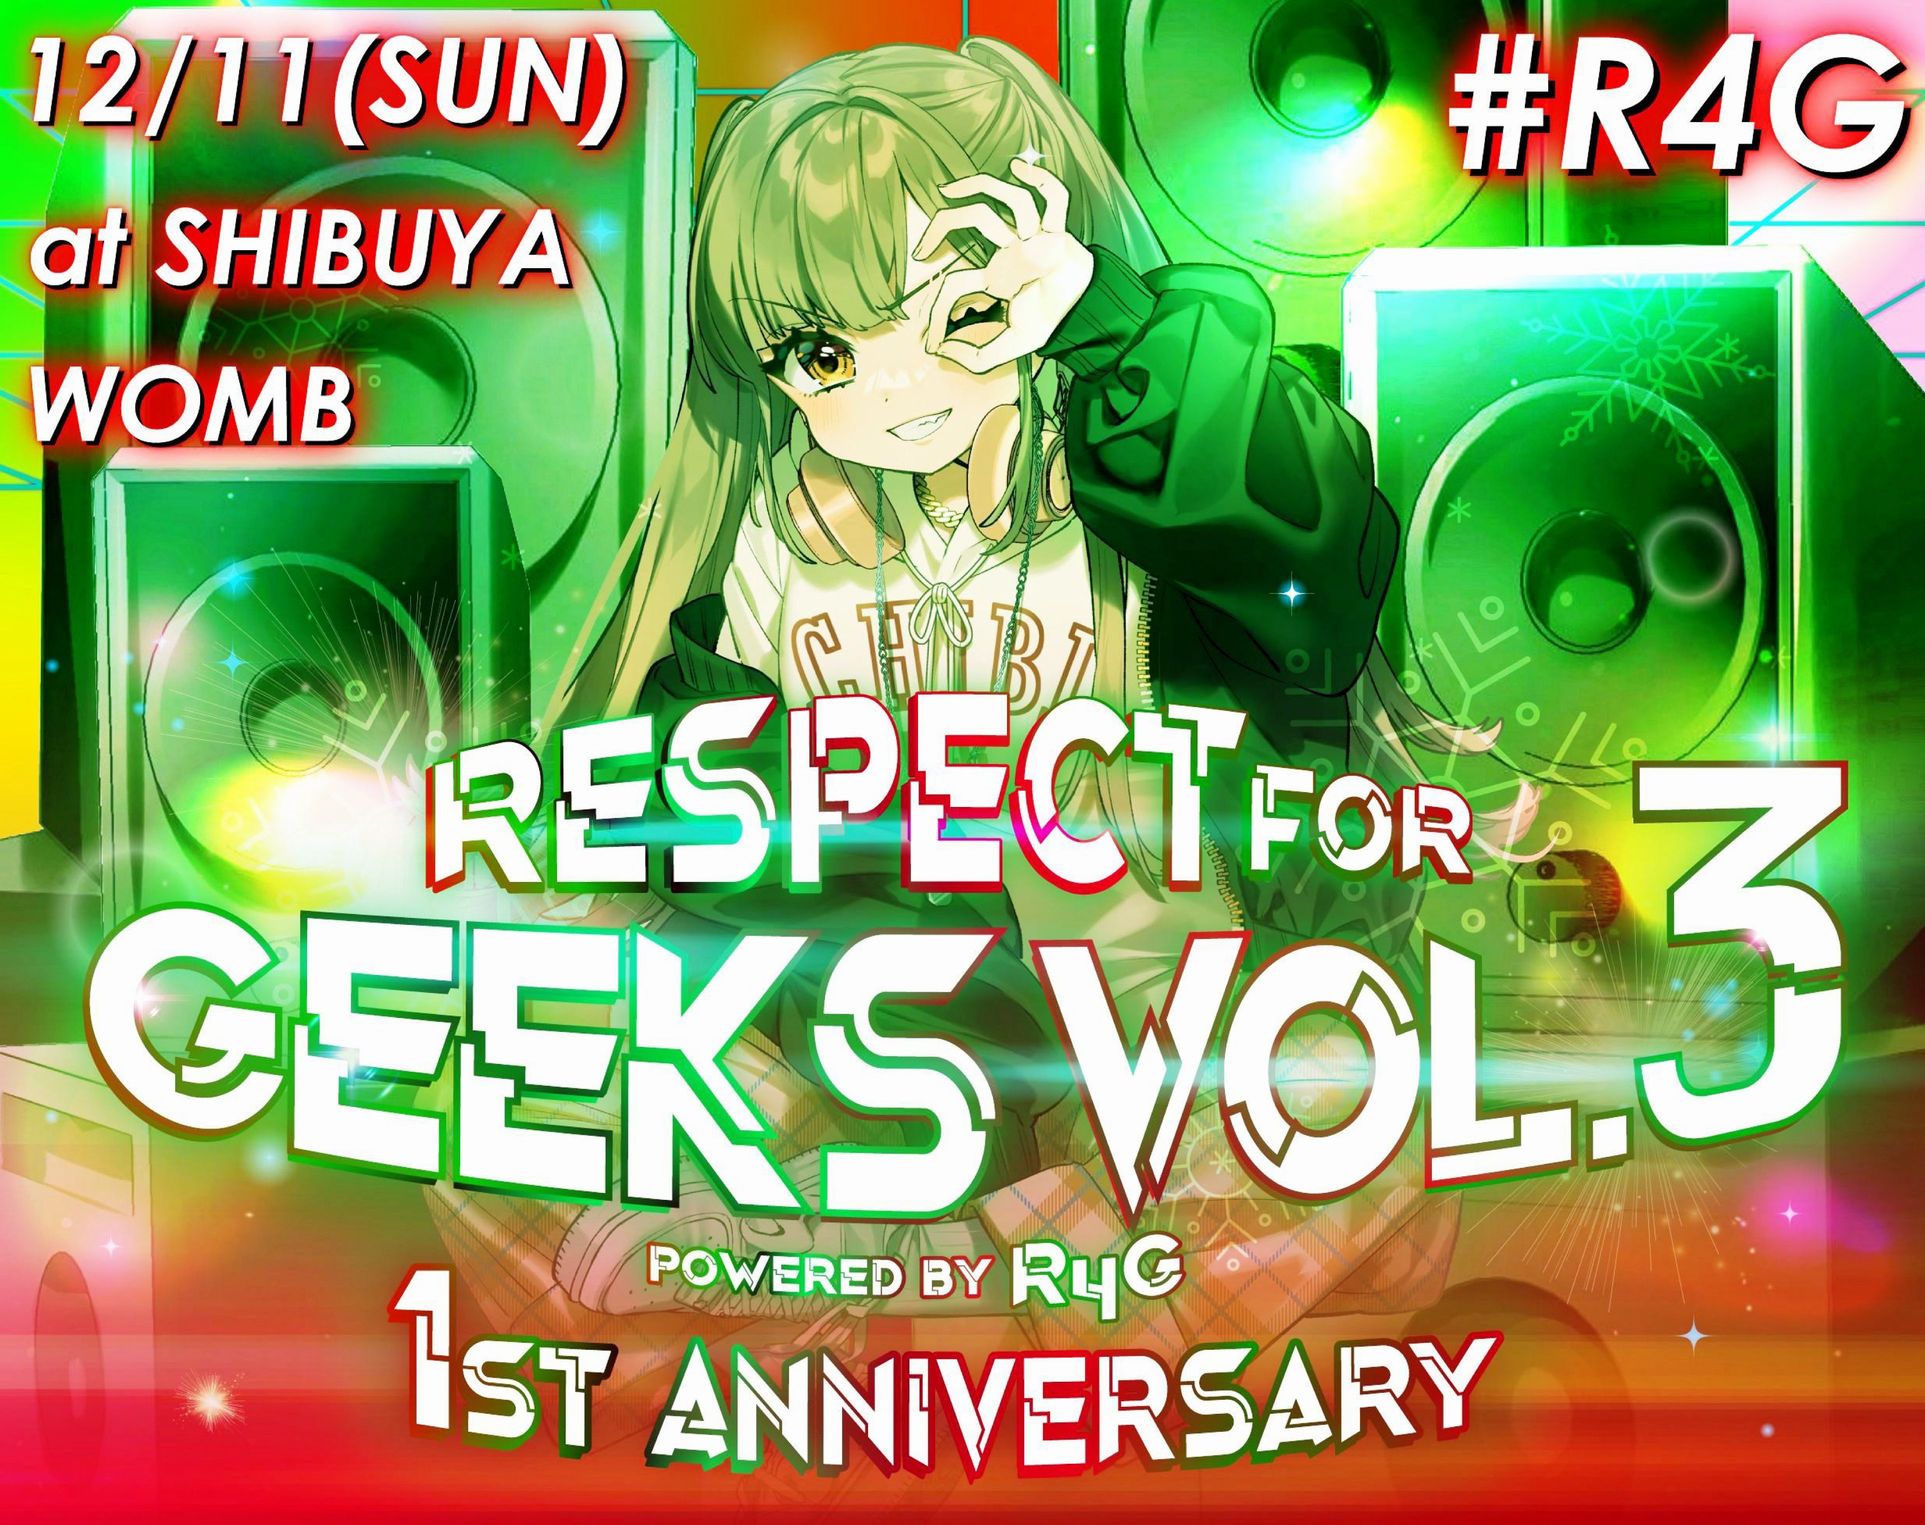 RESPECT FOR GEEKS vol.3 -1st Anniversary- powered by #R4G